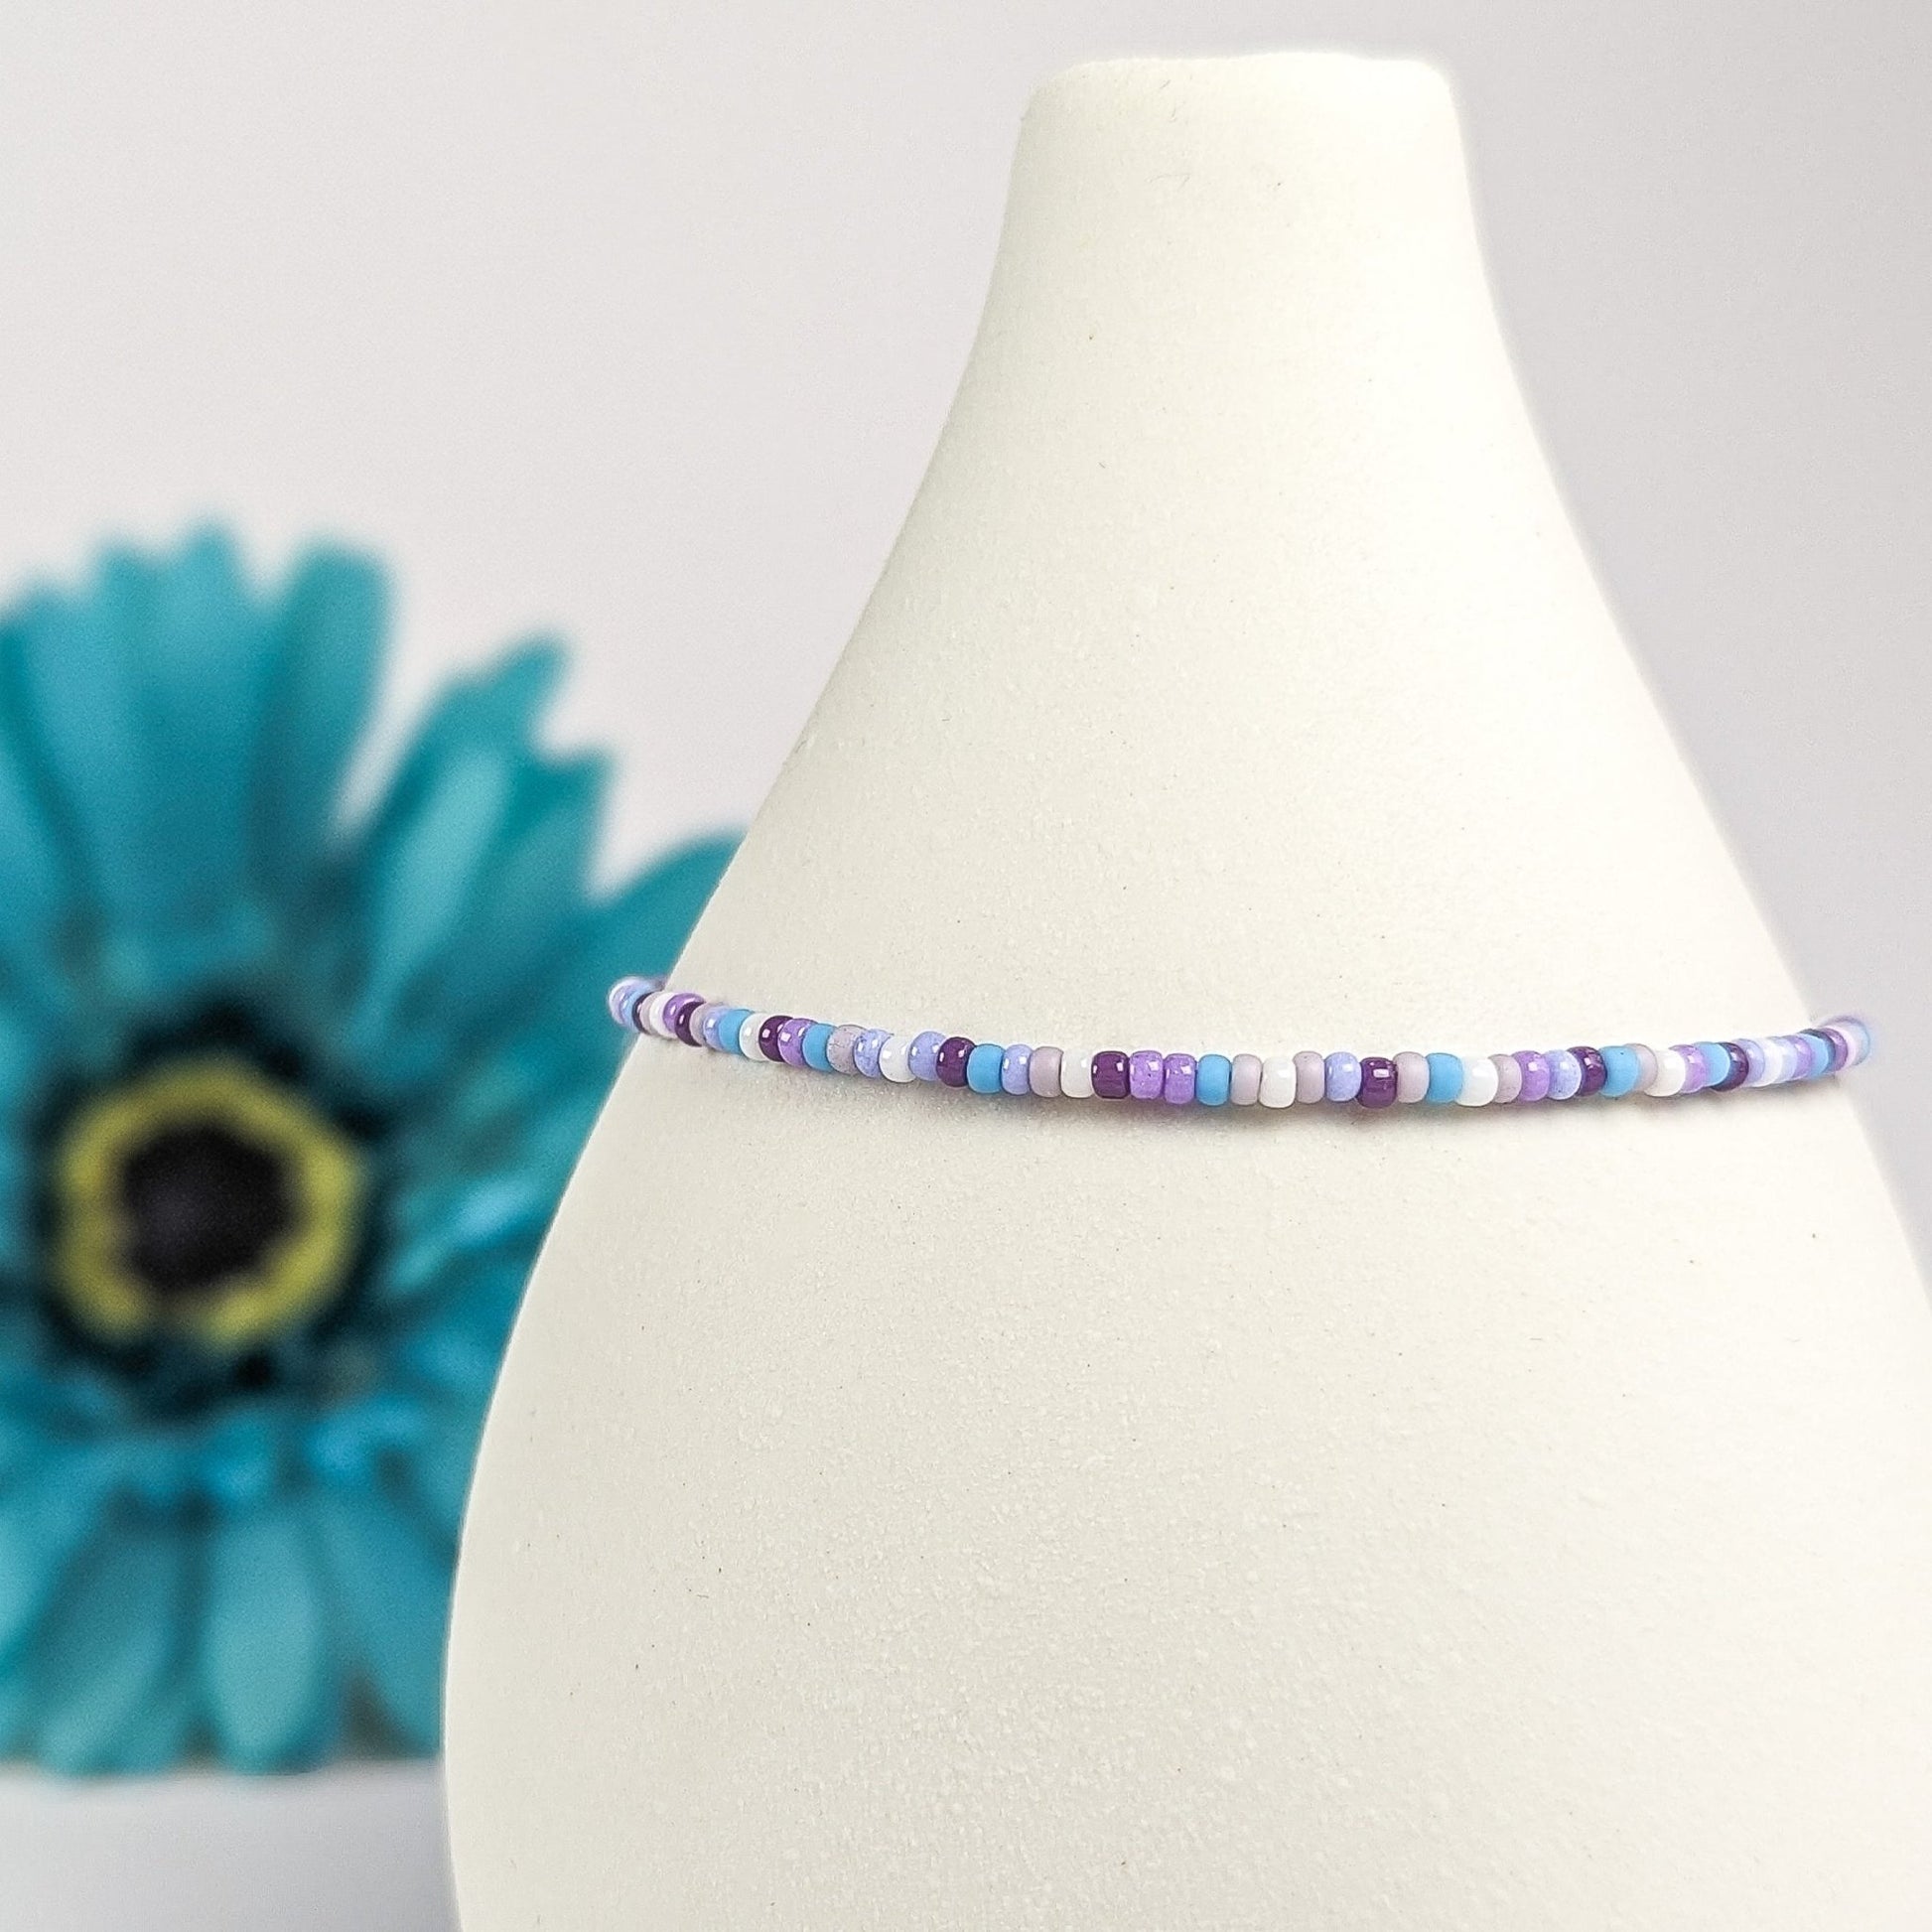 Dainty bracelet - purple, blue and white seed beads - creations by cherie